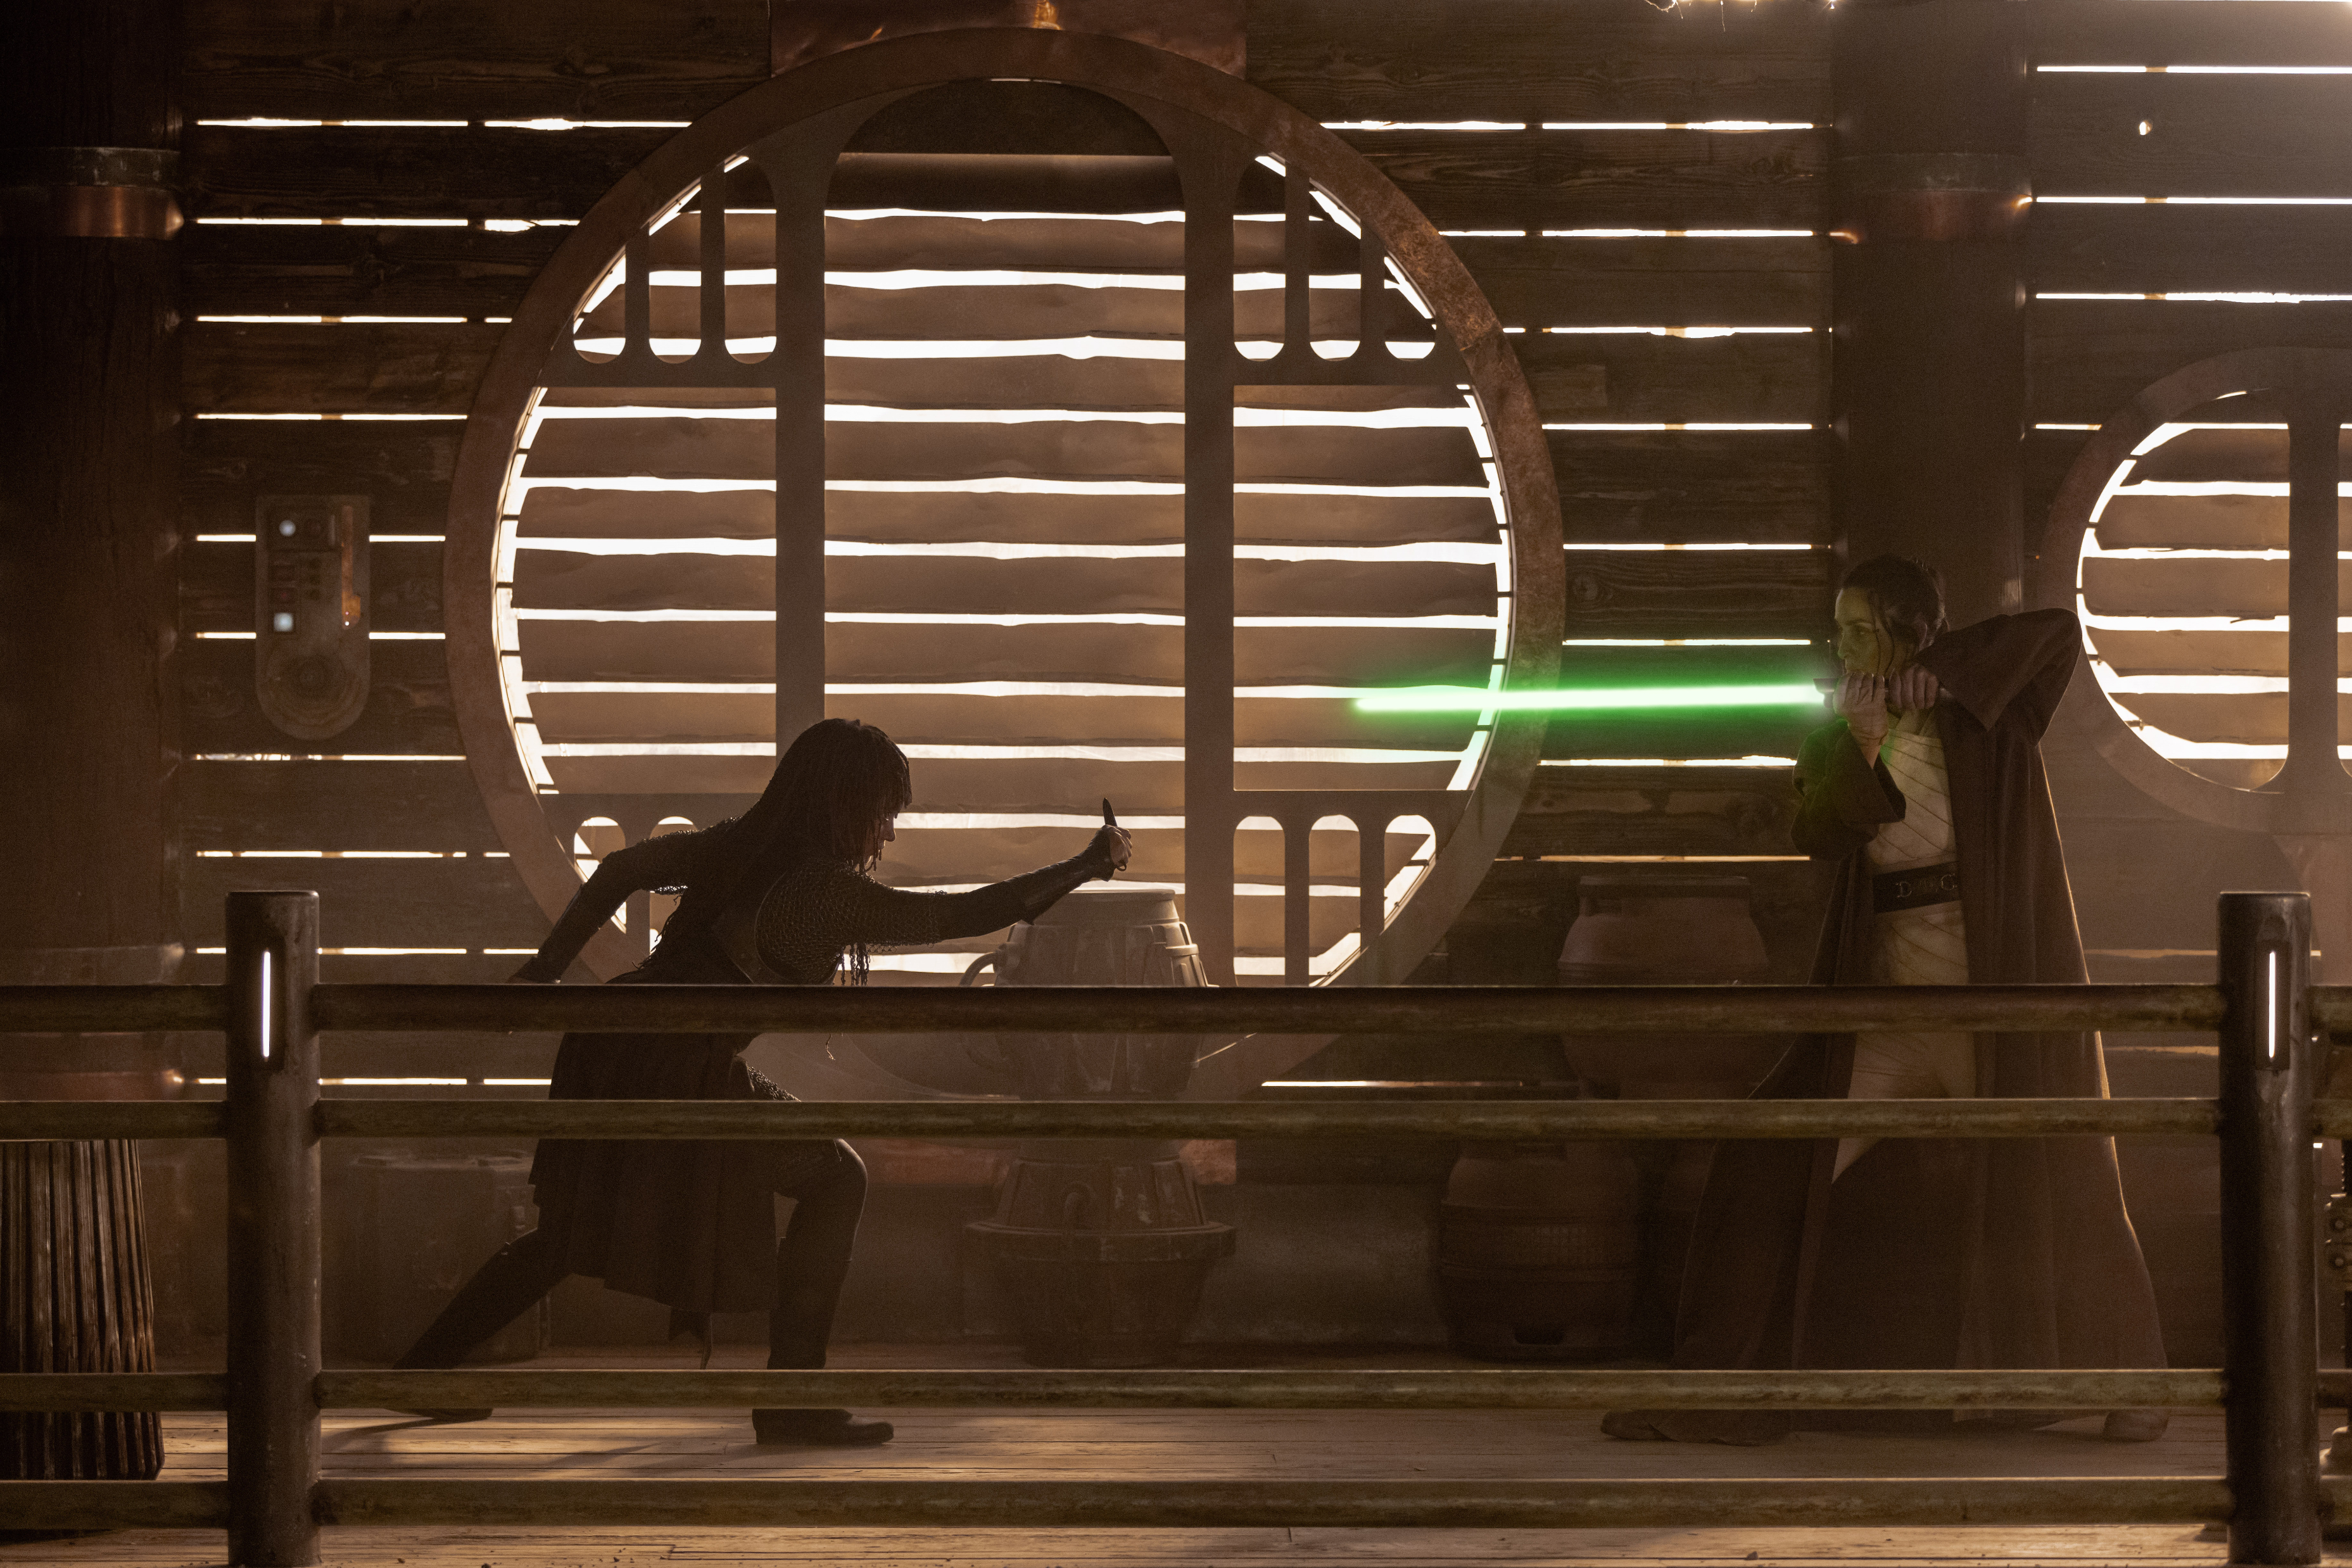 Master Indara points her green lightsaber at Mae in The Acolyte.